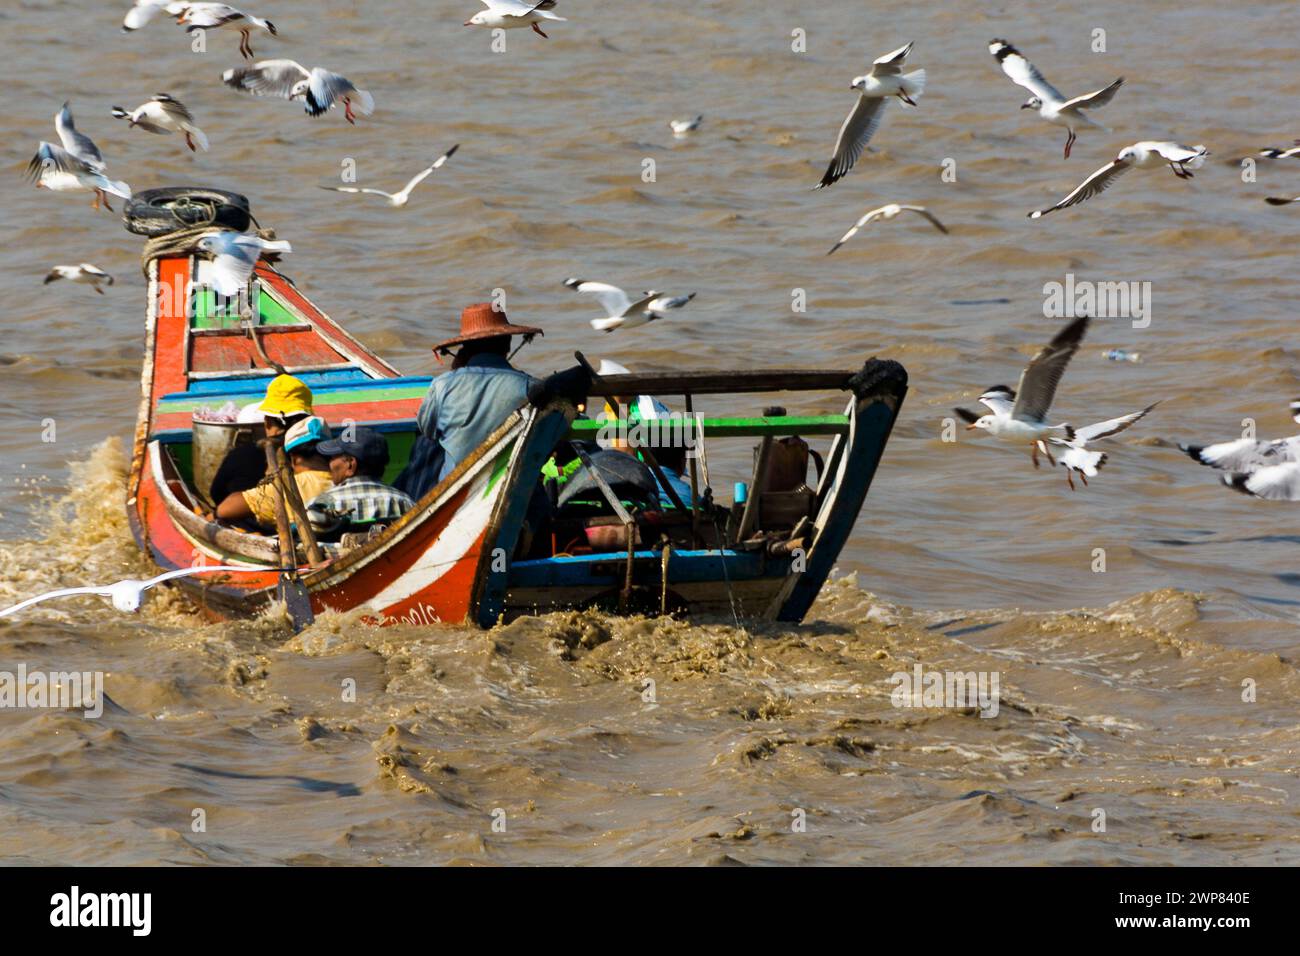 An aged fishing vessel with passengers in the sea surrounded by seabirds in Yangoon, Myanmar. Stock Photo